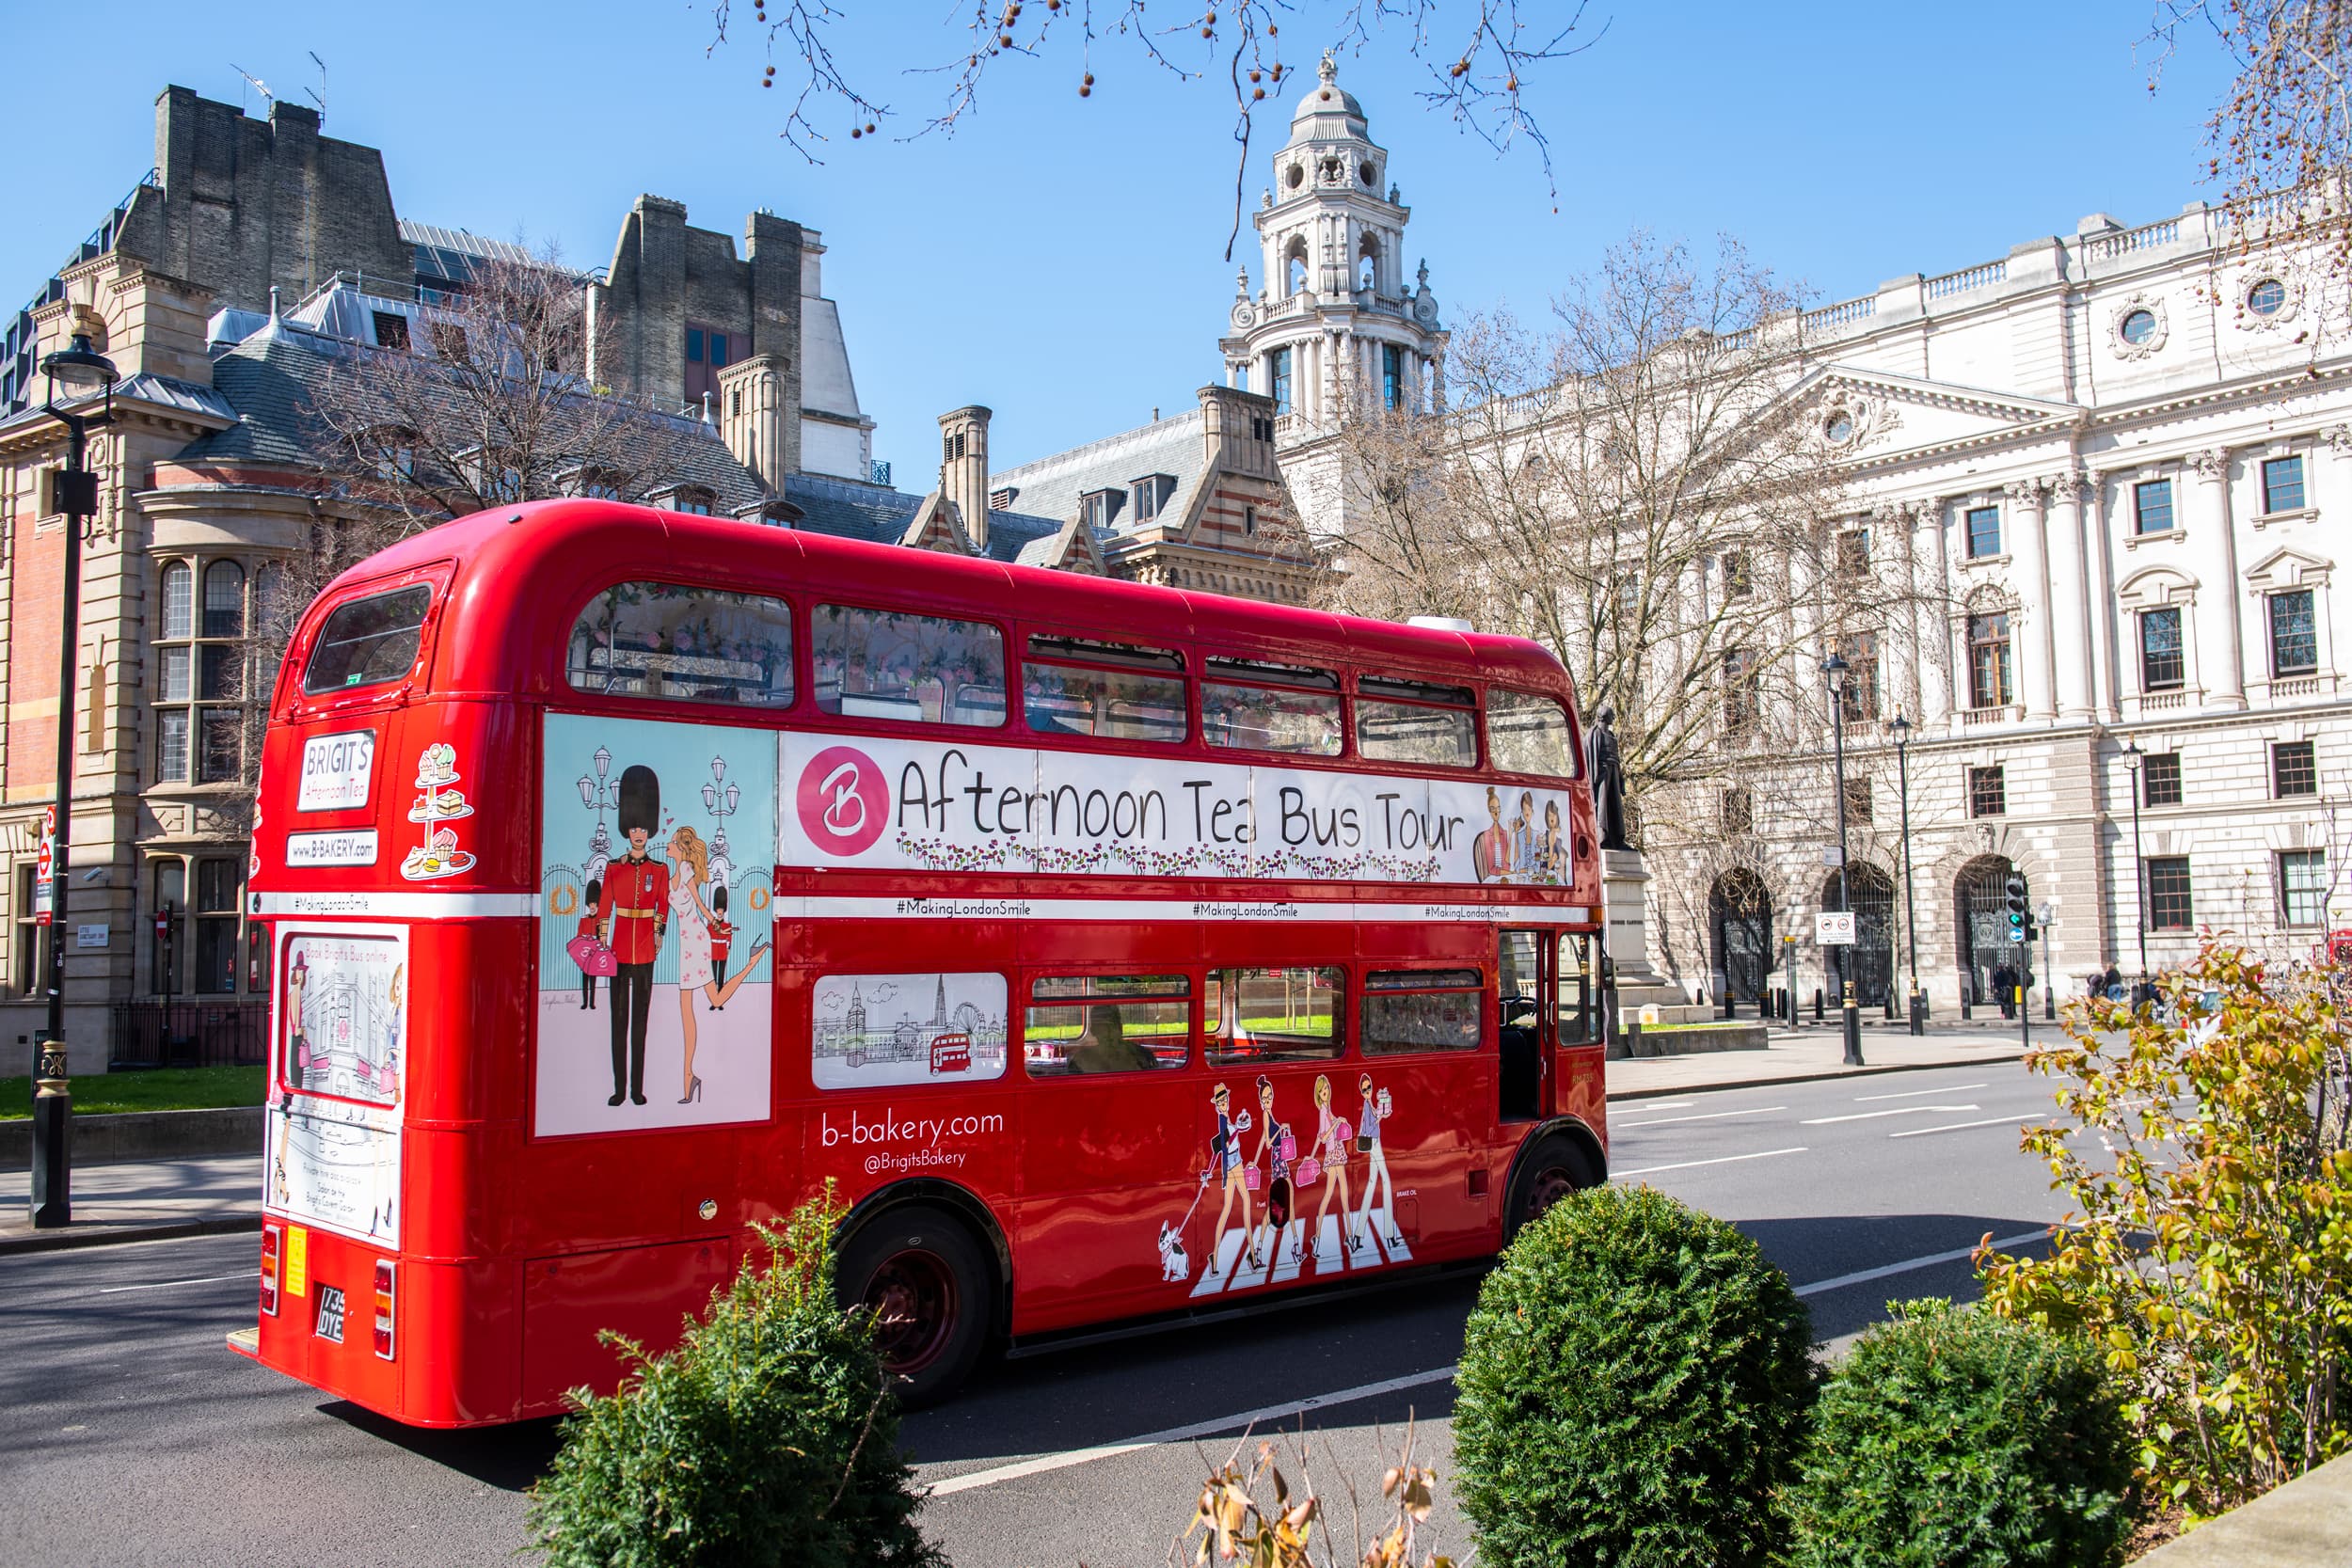 Family days out in London: Classic Afternoon Tea Bus Tour